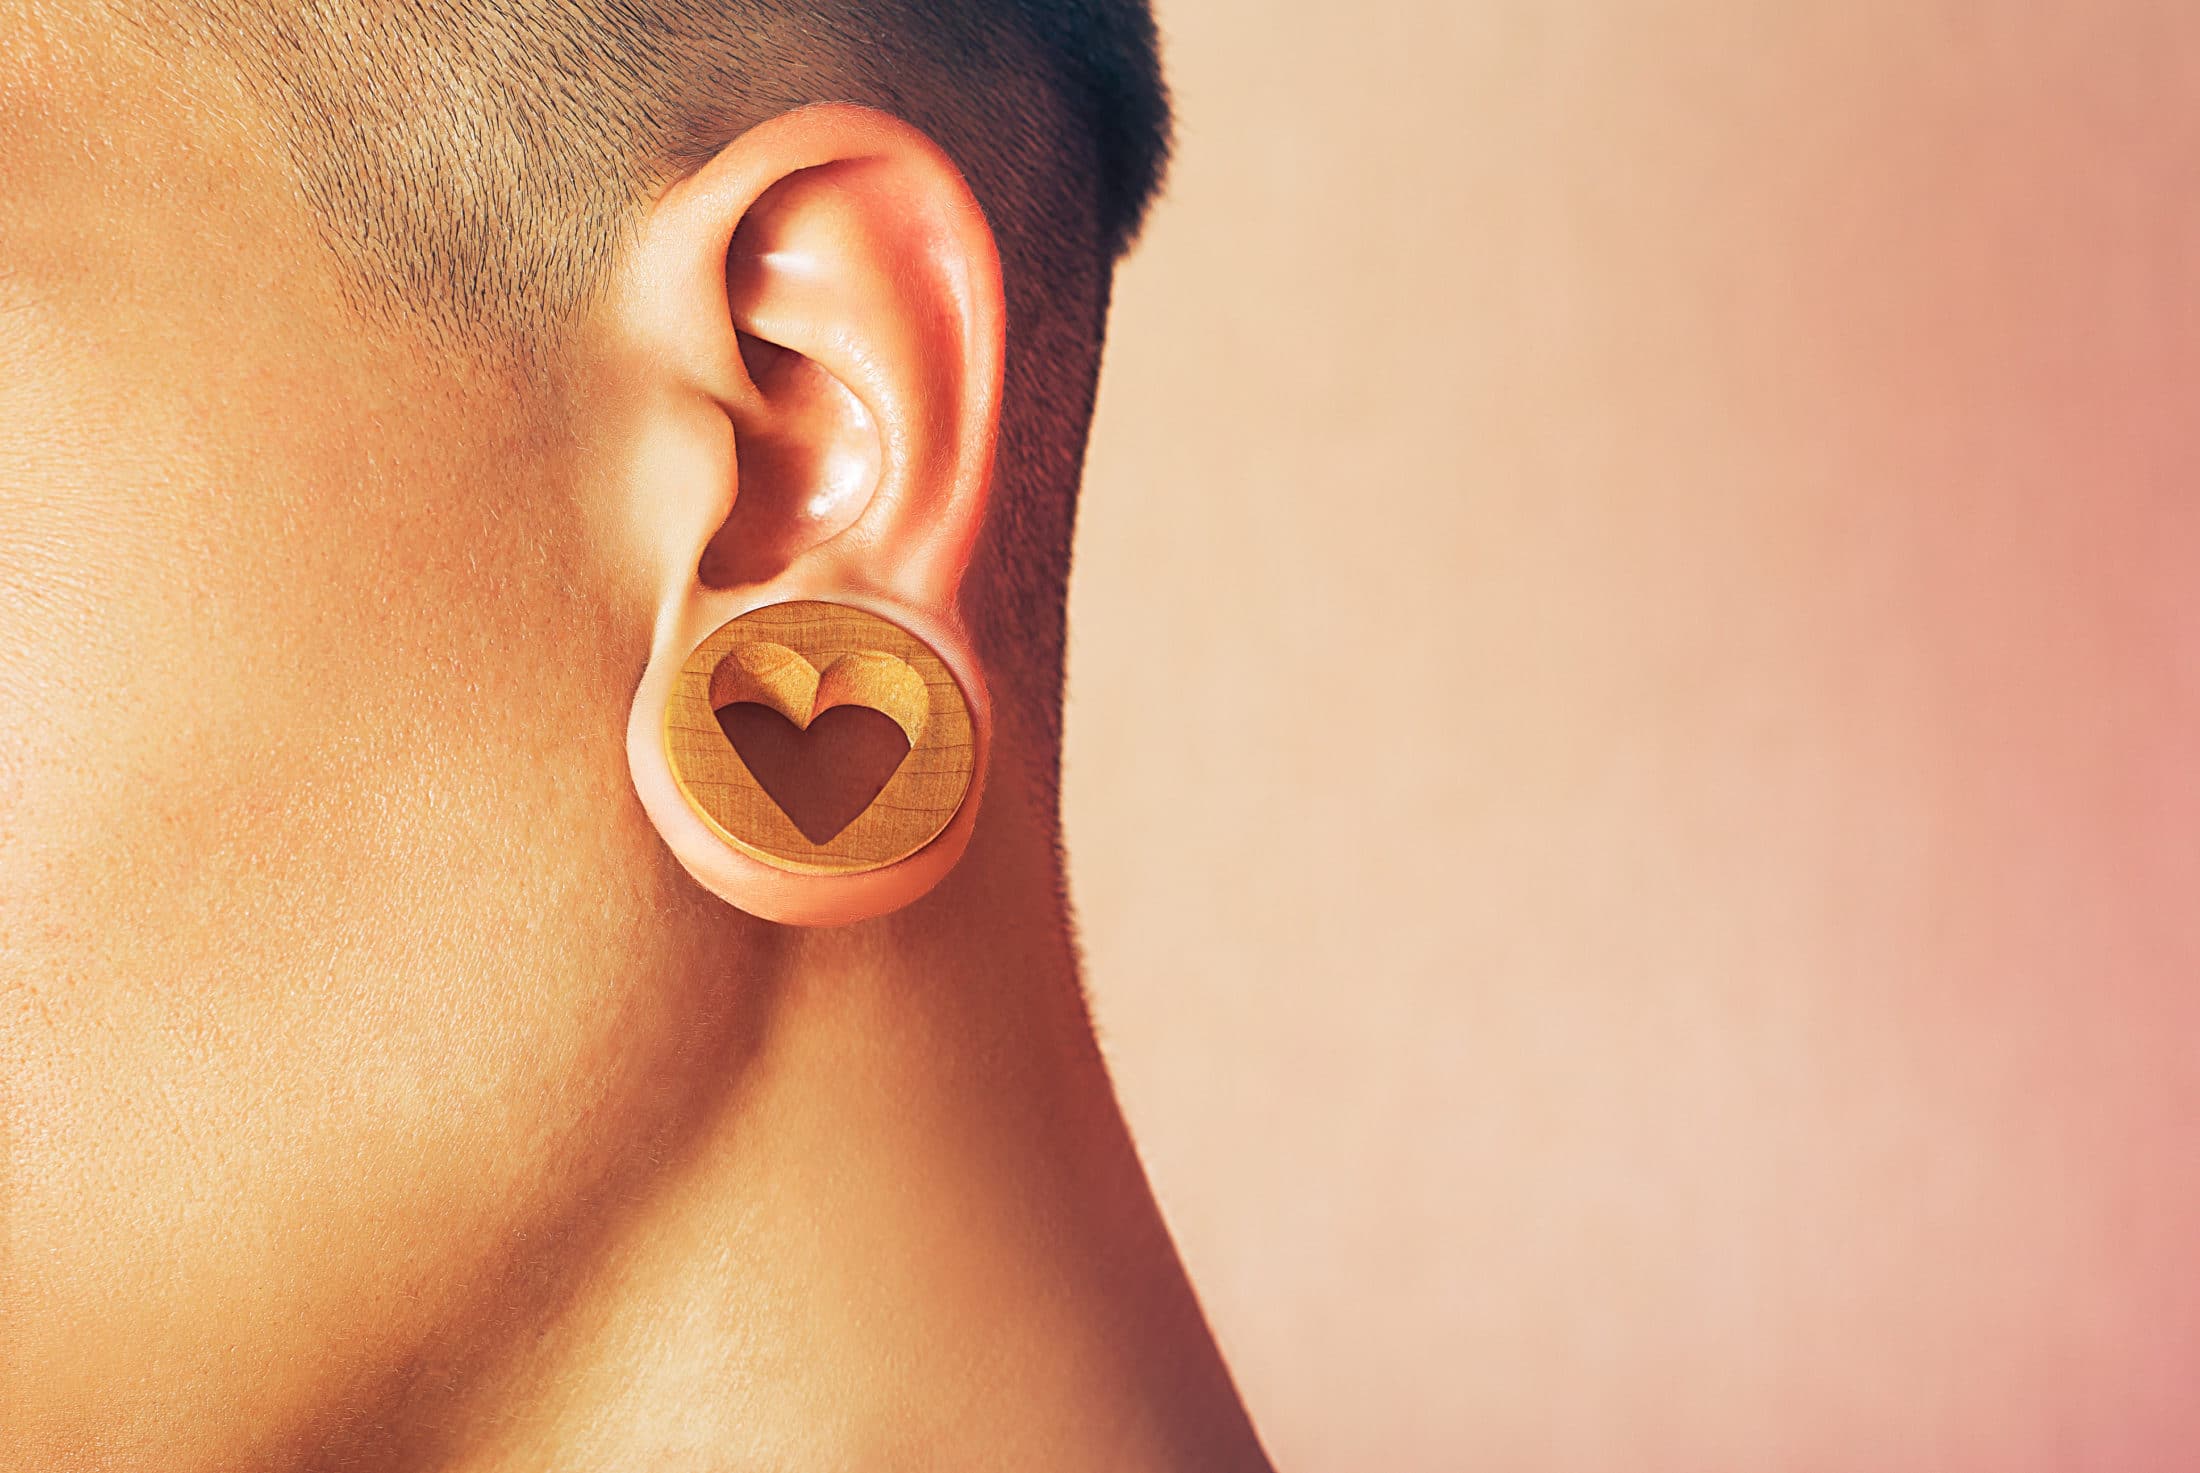 A piece of jewelry that fits into a stretched earlobe hole. Man with ear tunnel. Male ear with a ring